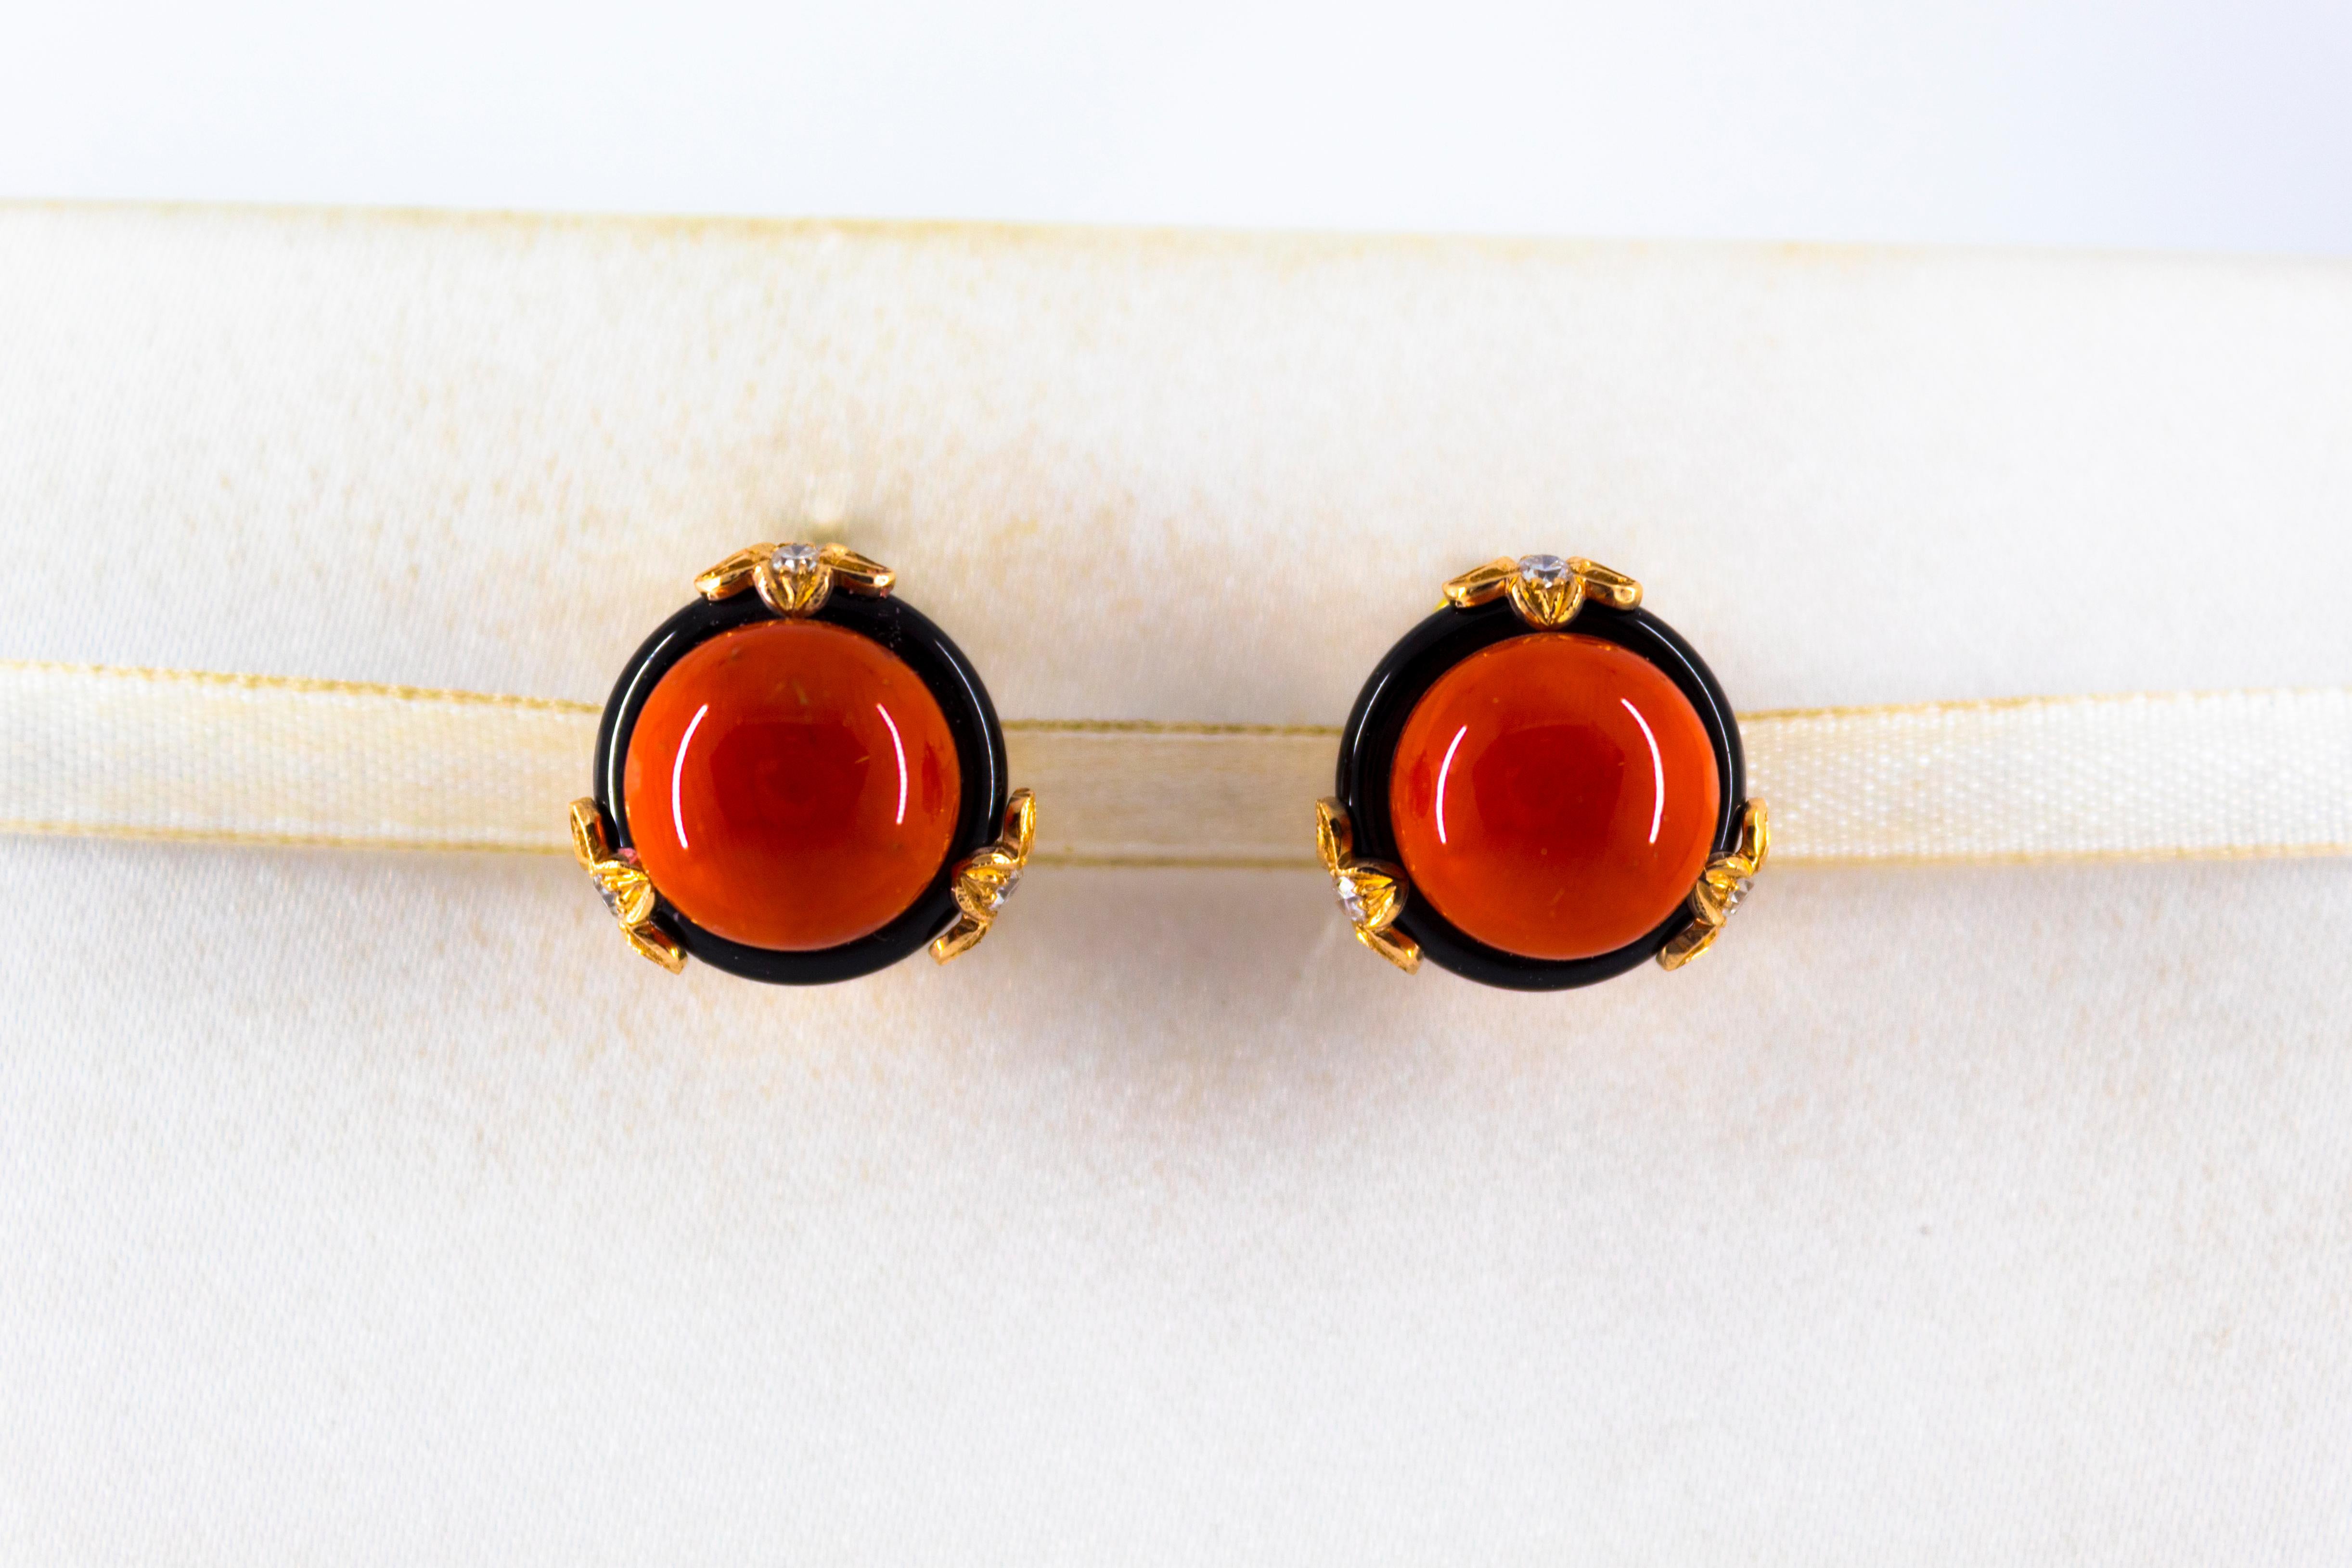 These Earrings are made of 14K Yellow Gold.
These Earrings have 0.24 Carats of White Diamonds.
These Earrings have Mediterranean (Sardinia, Italy) Red Coral and Onyx.
We're a workshop so every piece is handmade, customizable and resizable.